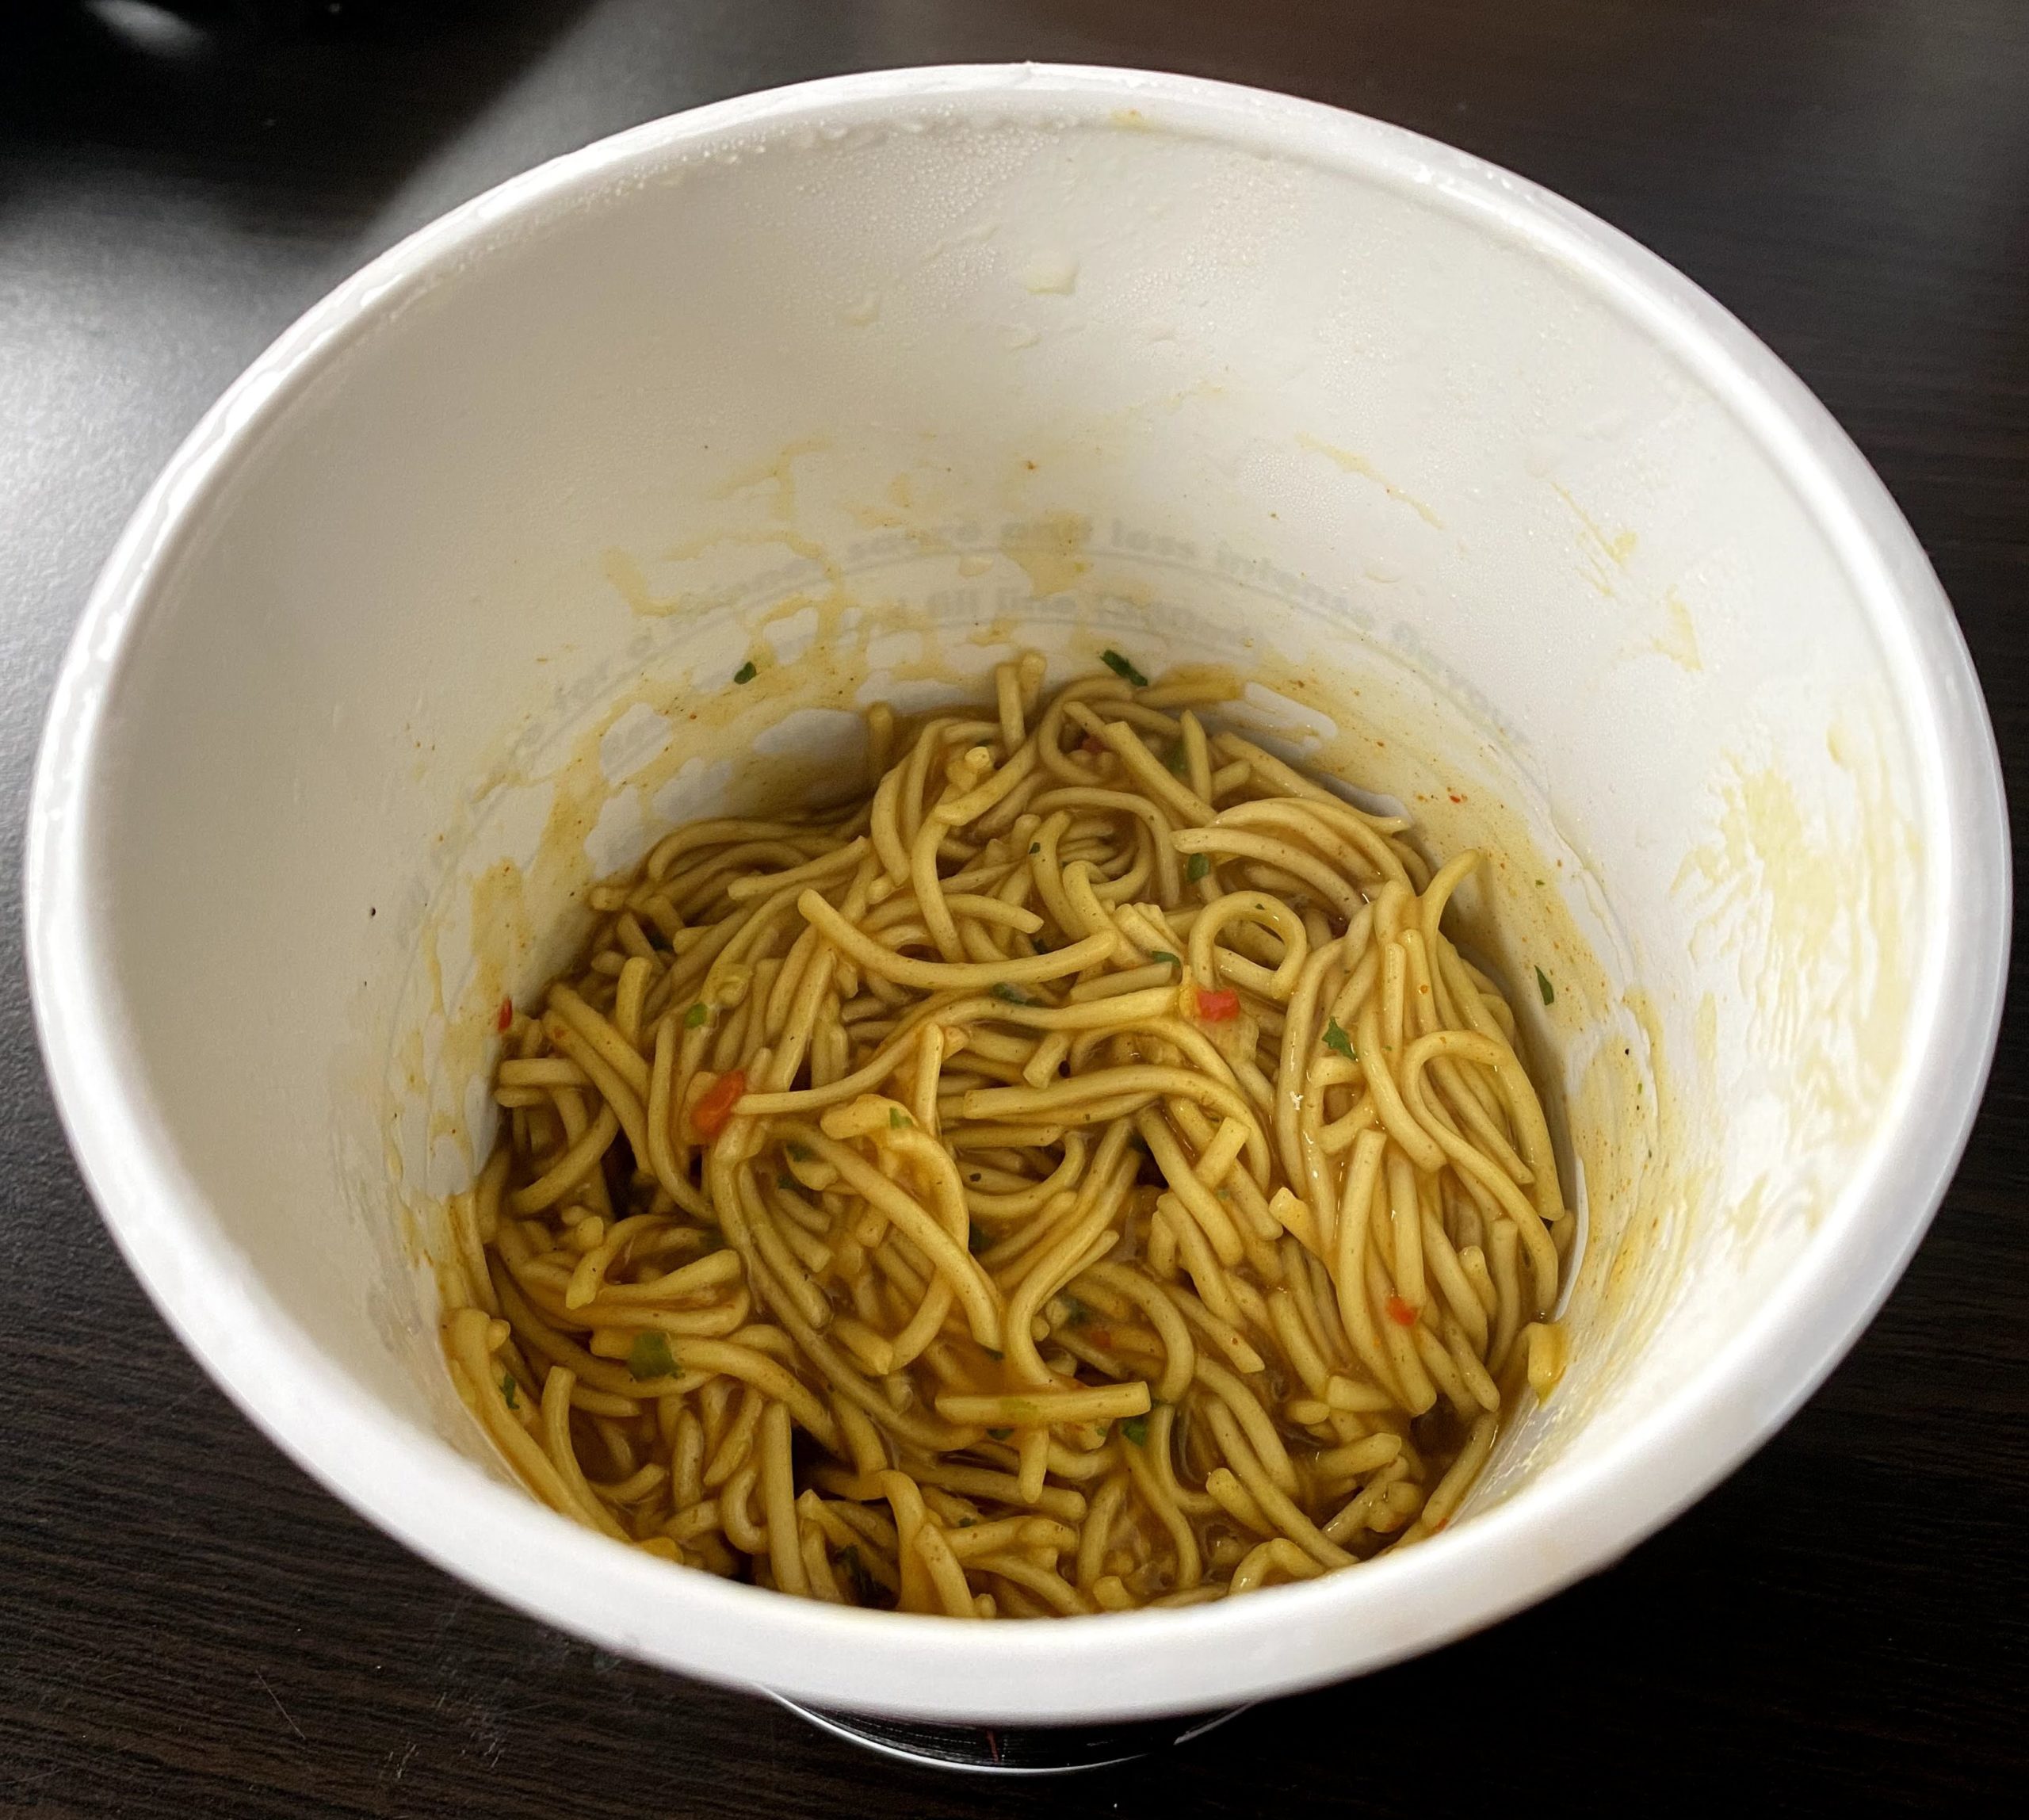 #1931: Naked Noodle The Big One "Mee Goreng"